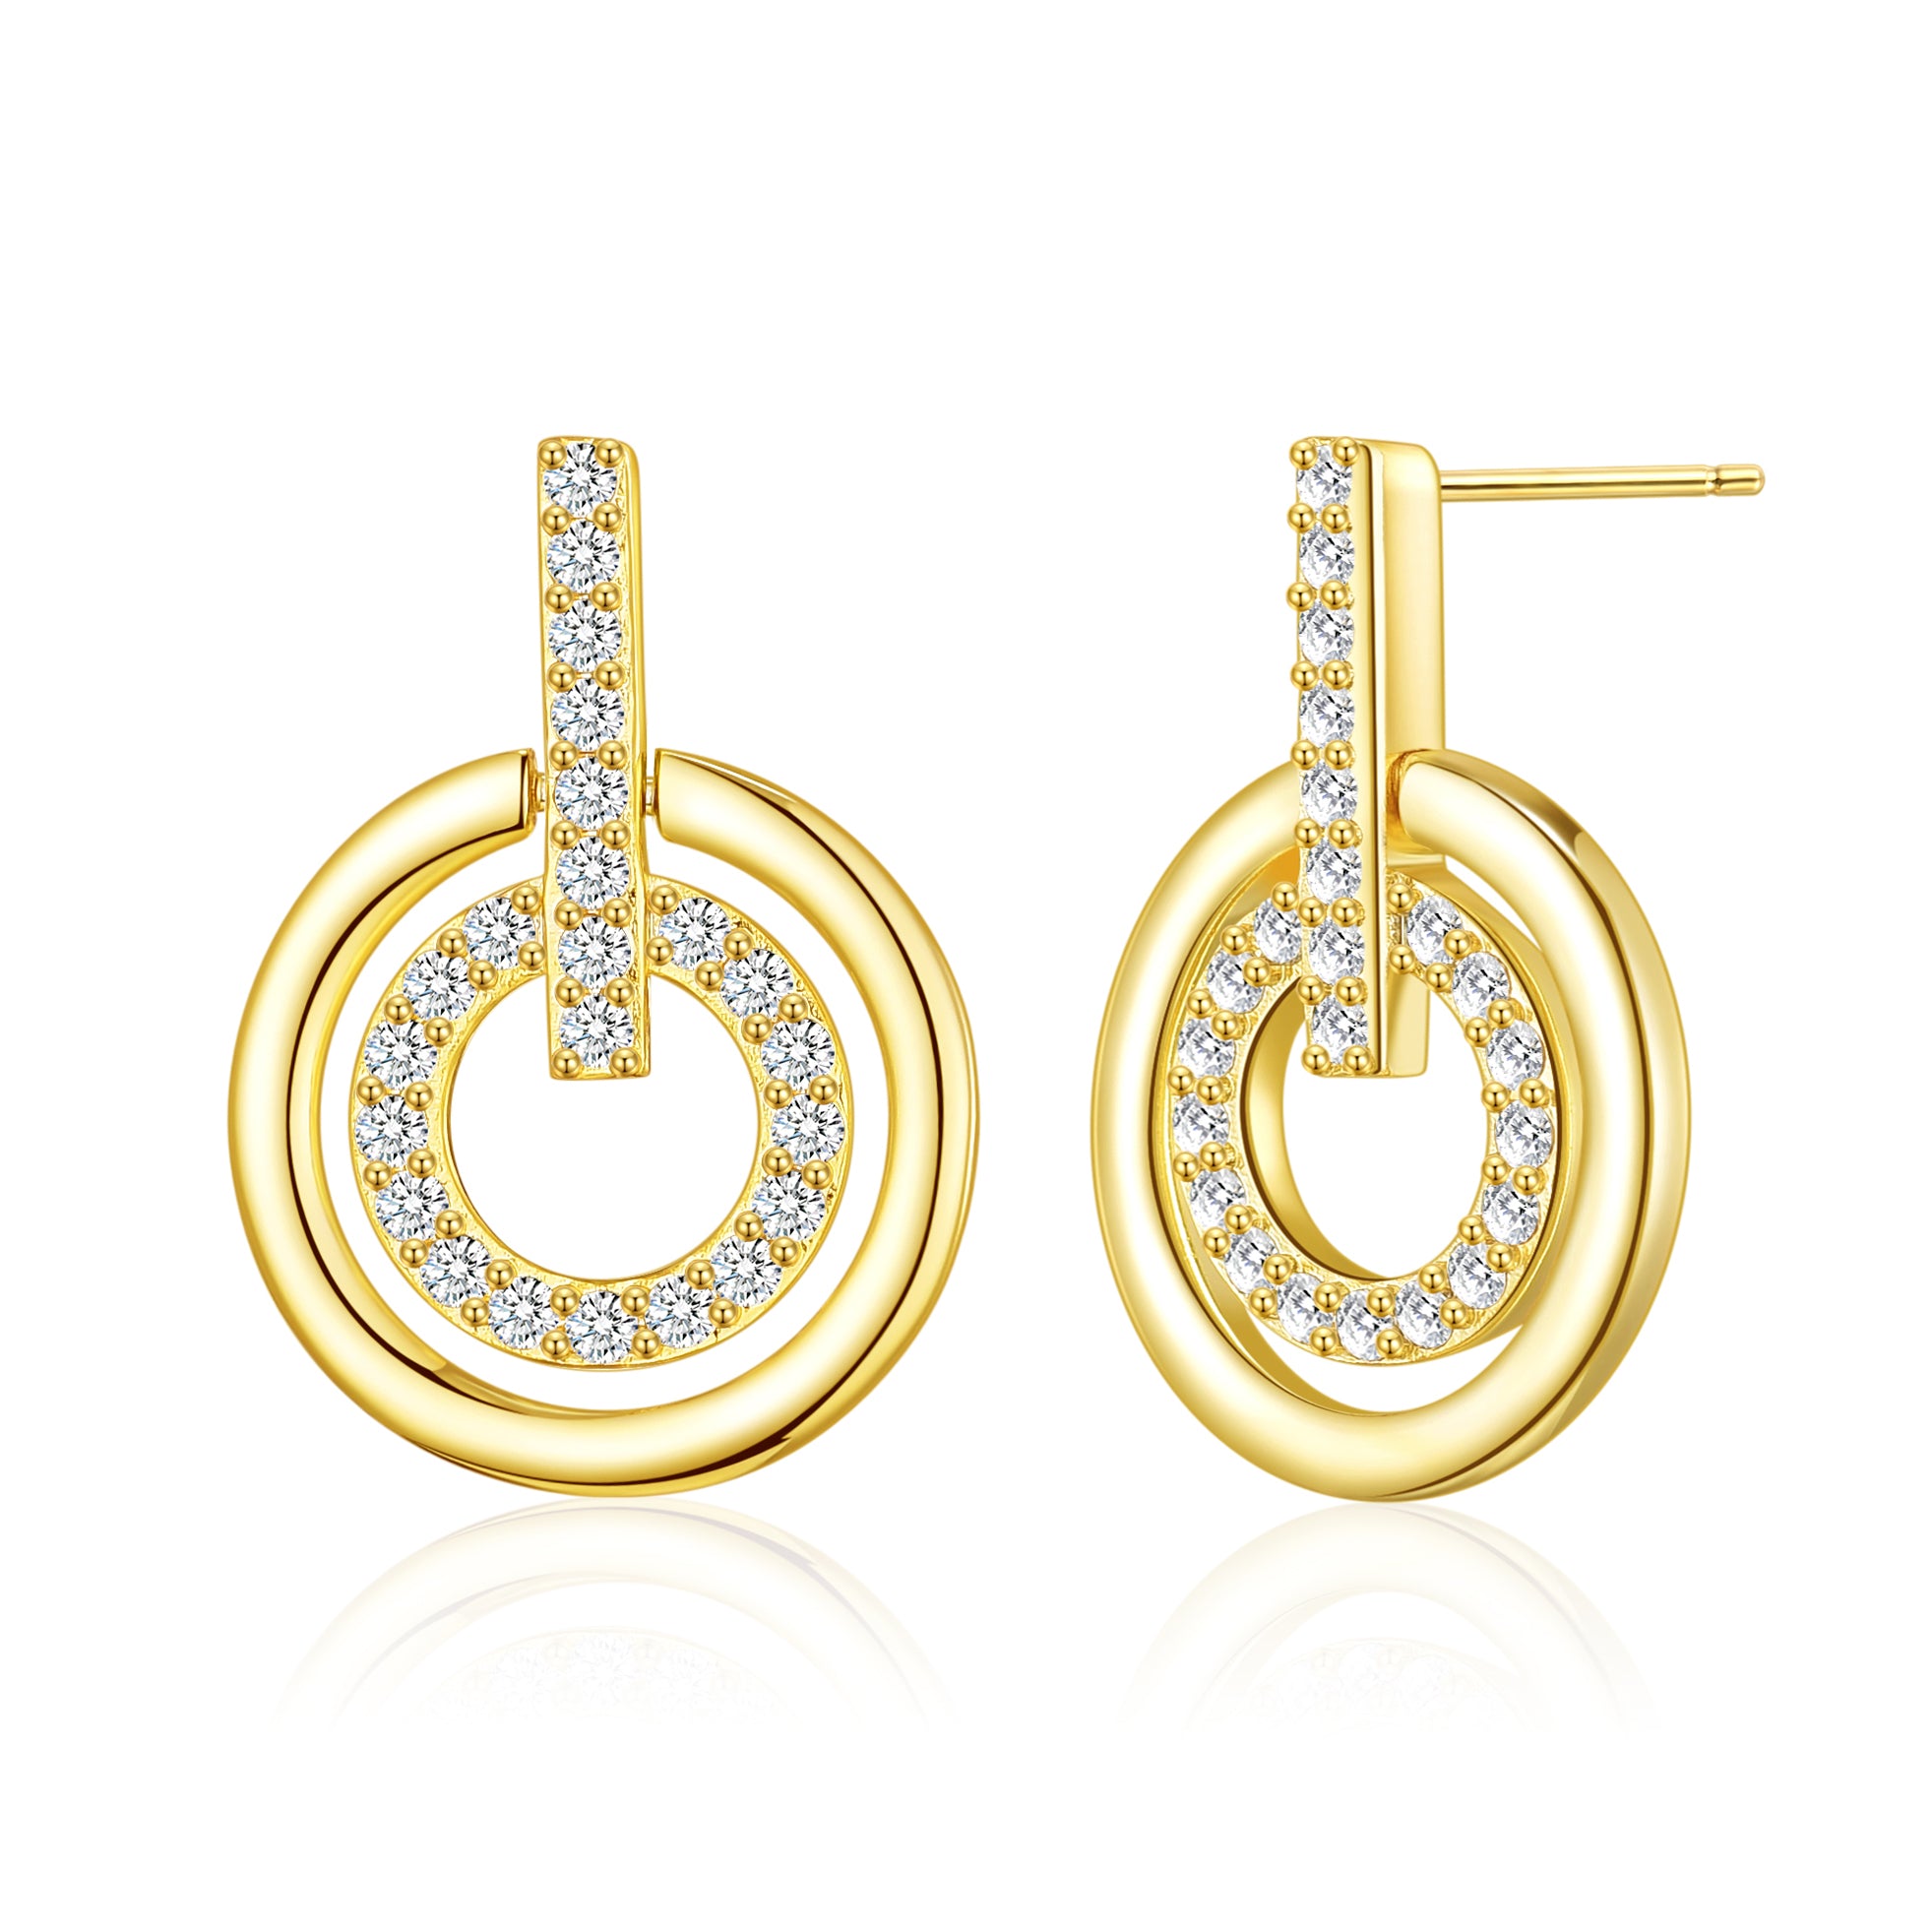 Gold Plated Double Circle Drop Earrings Created with Zircondia® Crystals